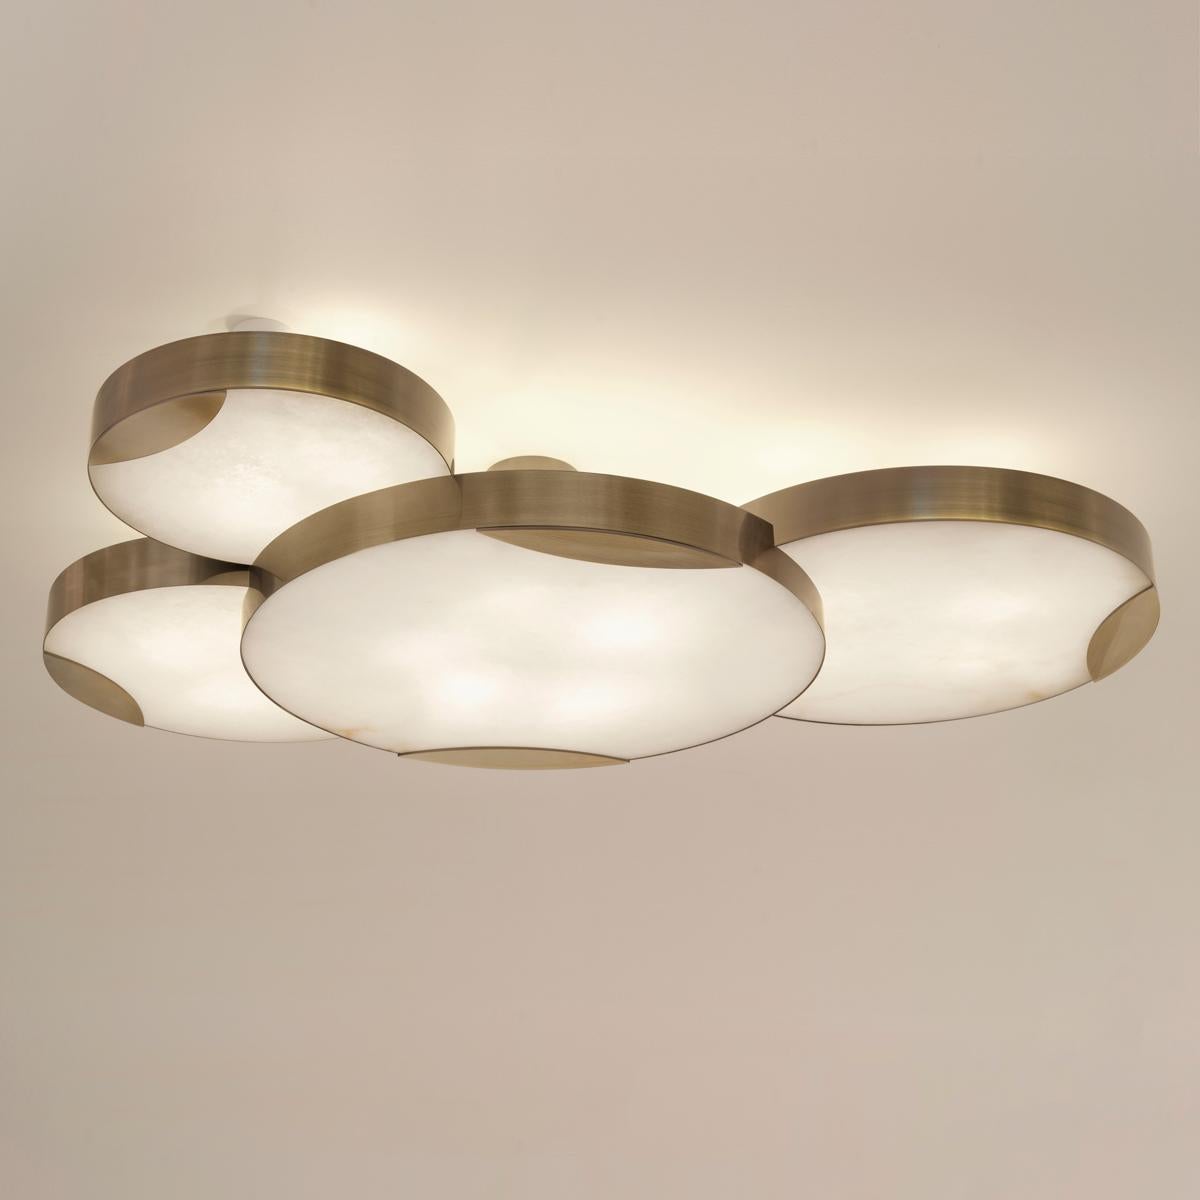 Cloud N.4 Ceiling Light by Gaspare Asaro-Peltro Finish For Sale 2